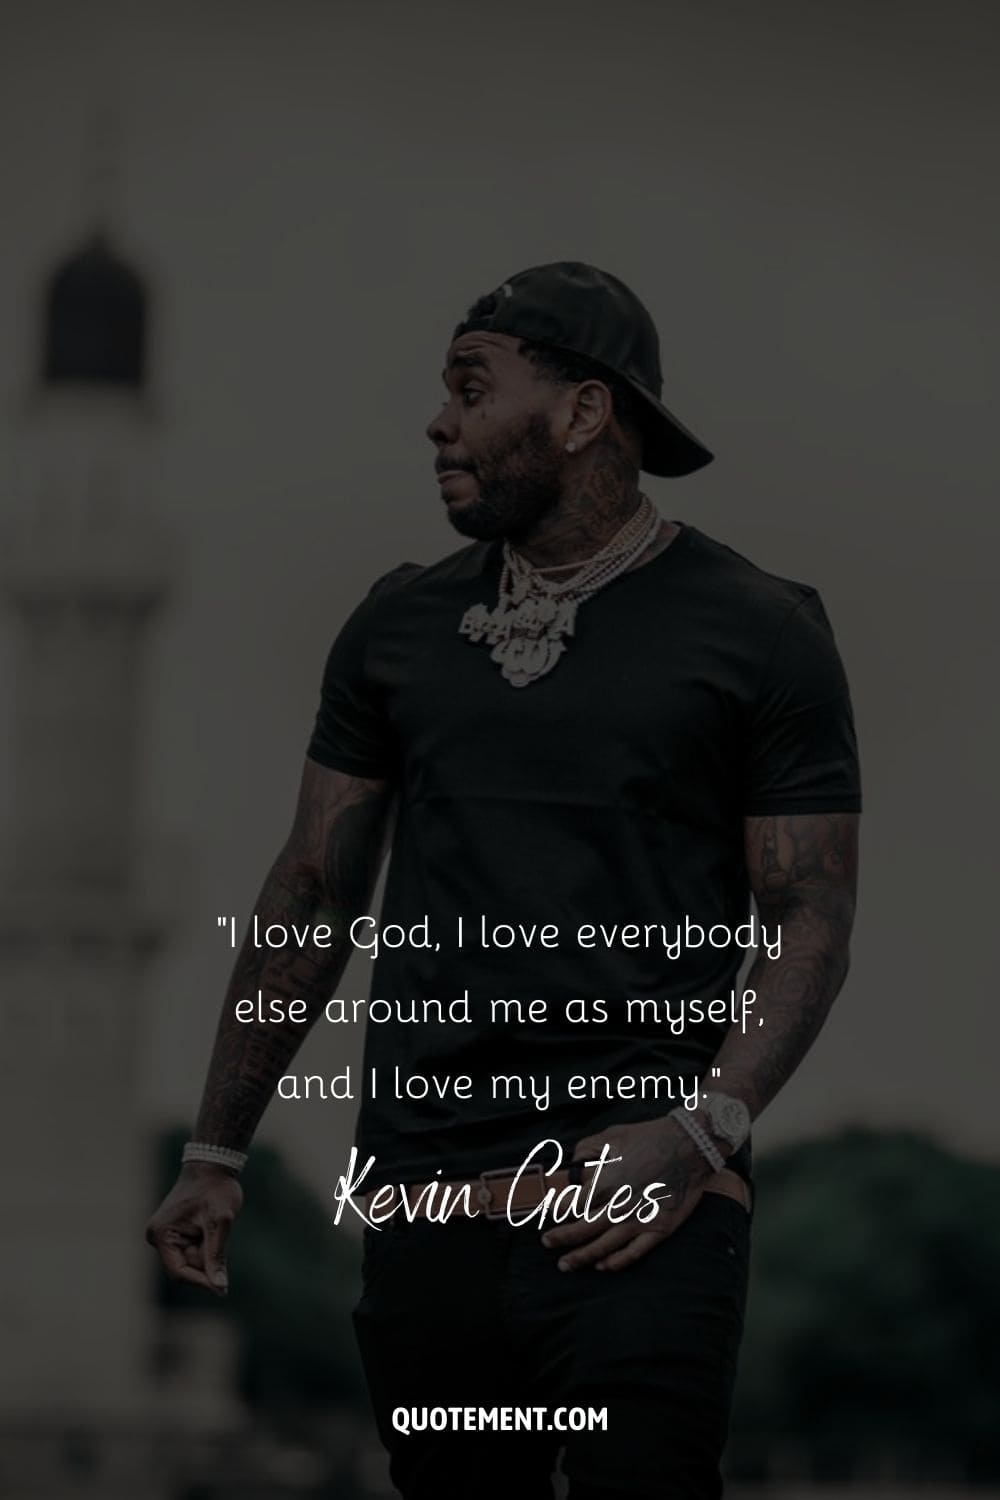 “I love God, I love everybody else around me as myself, and I love my enemy.” – Kevin Gates